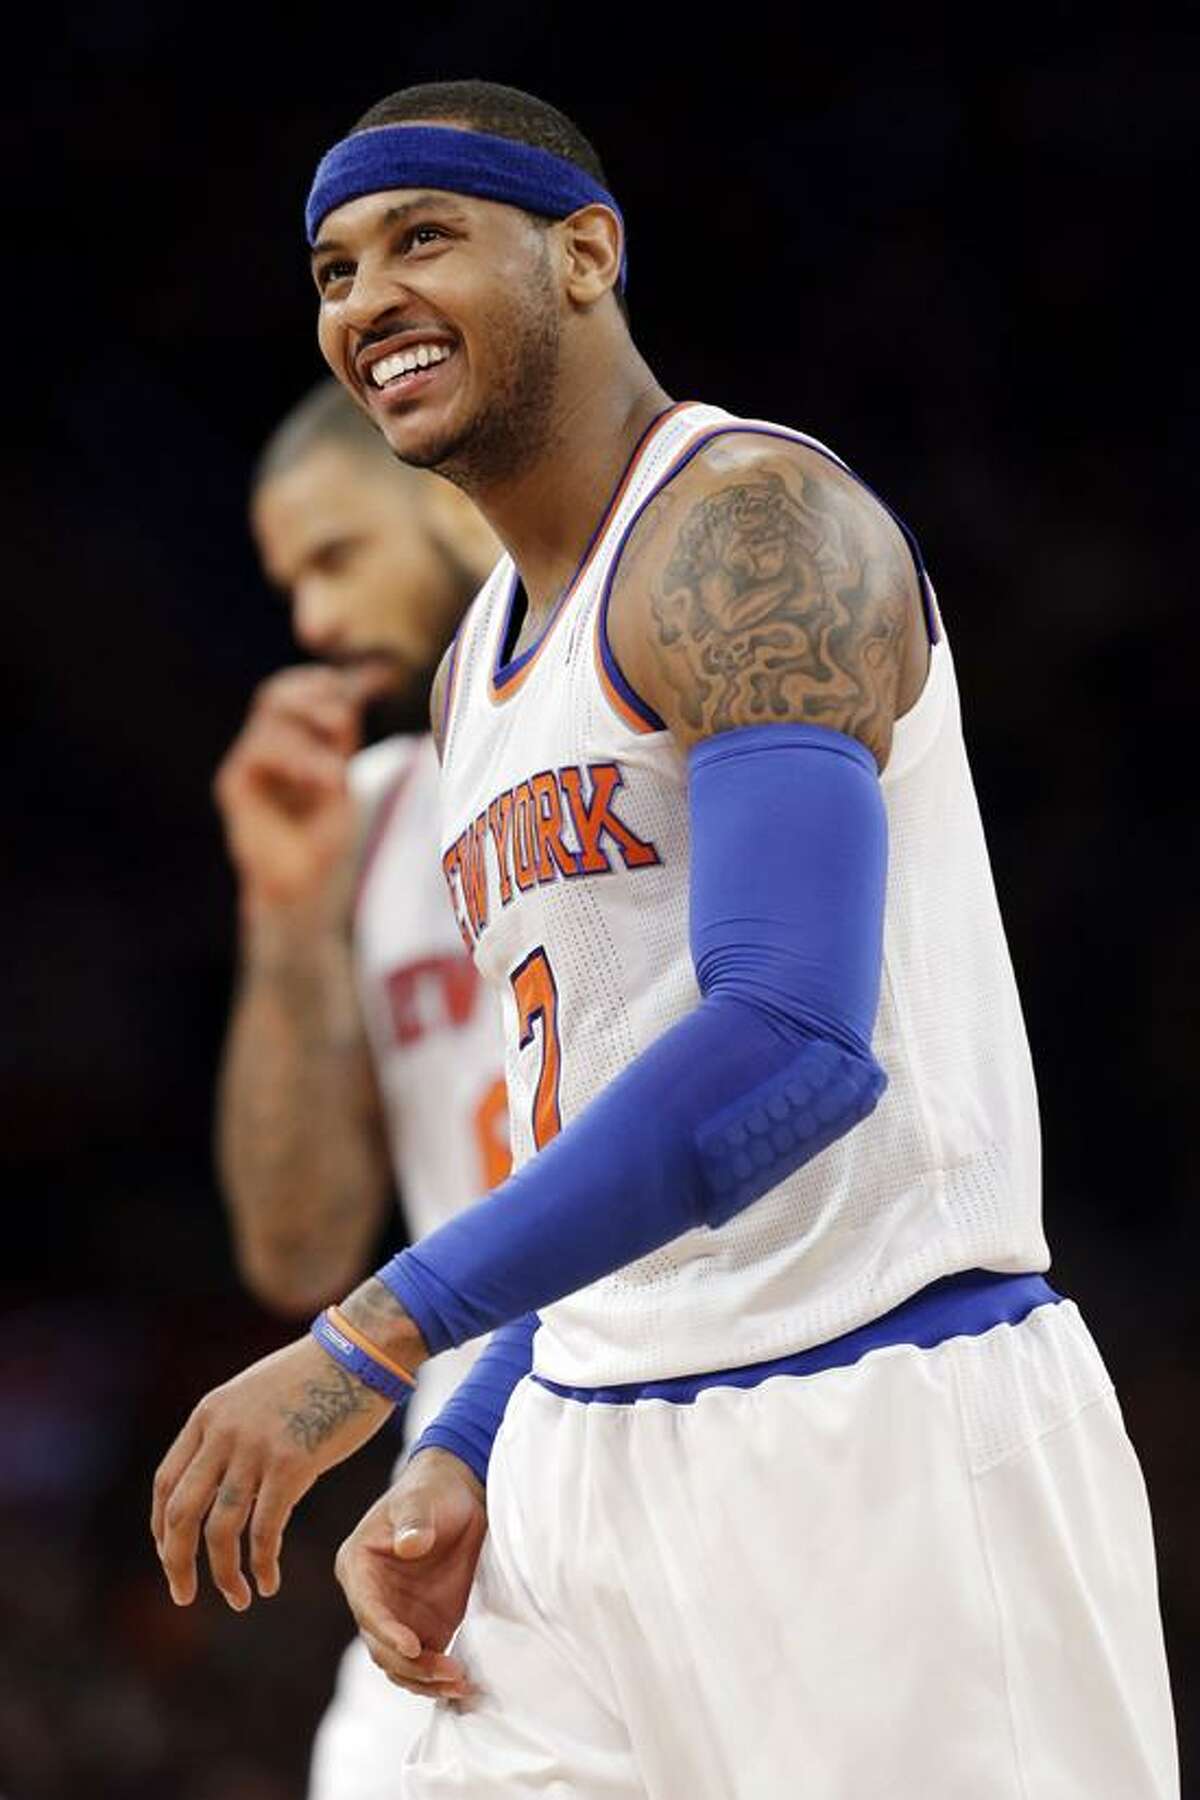 Ex-Knick Carmelo Anthony returns to MSG